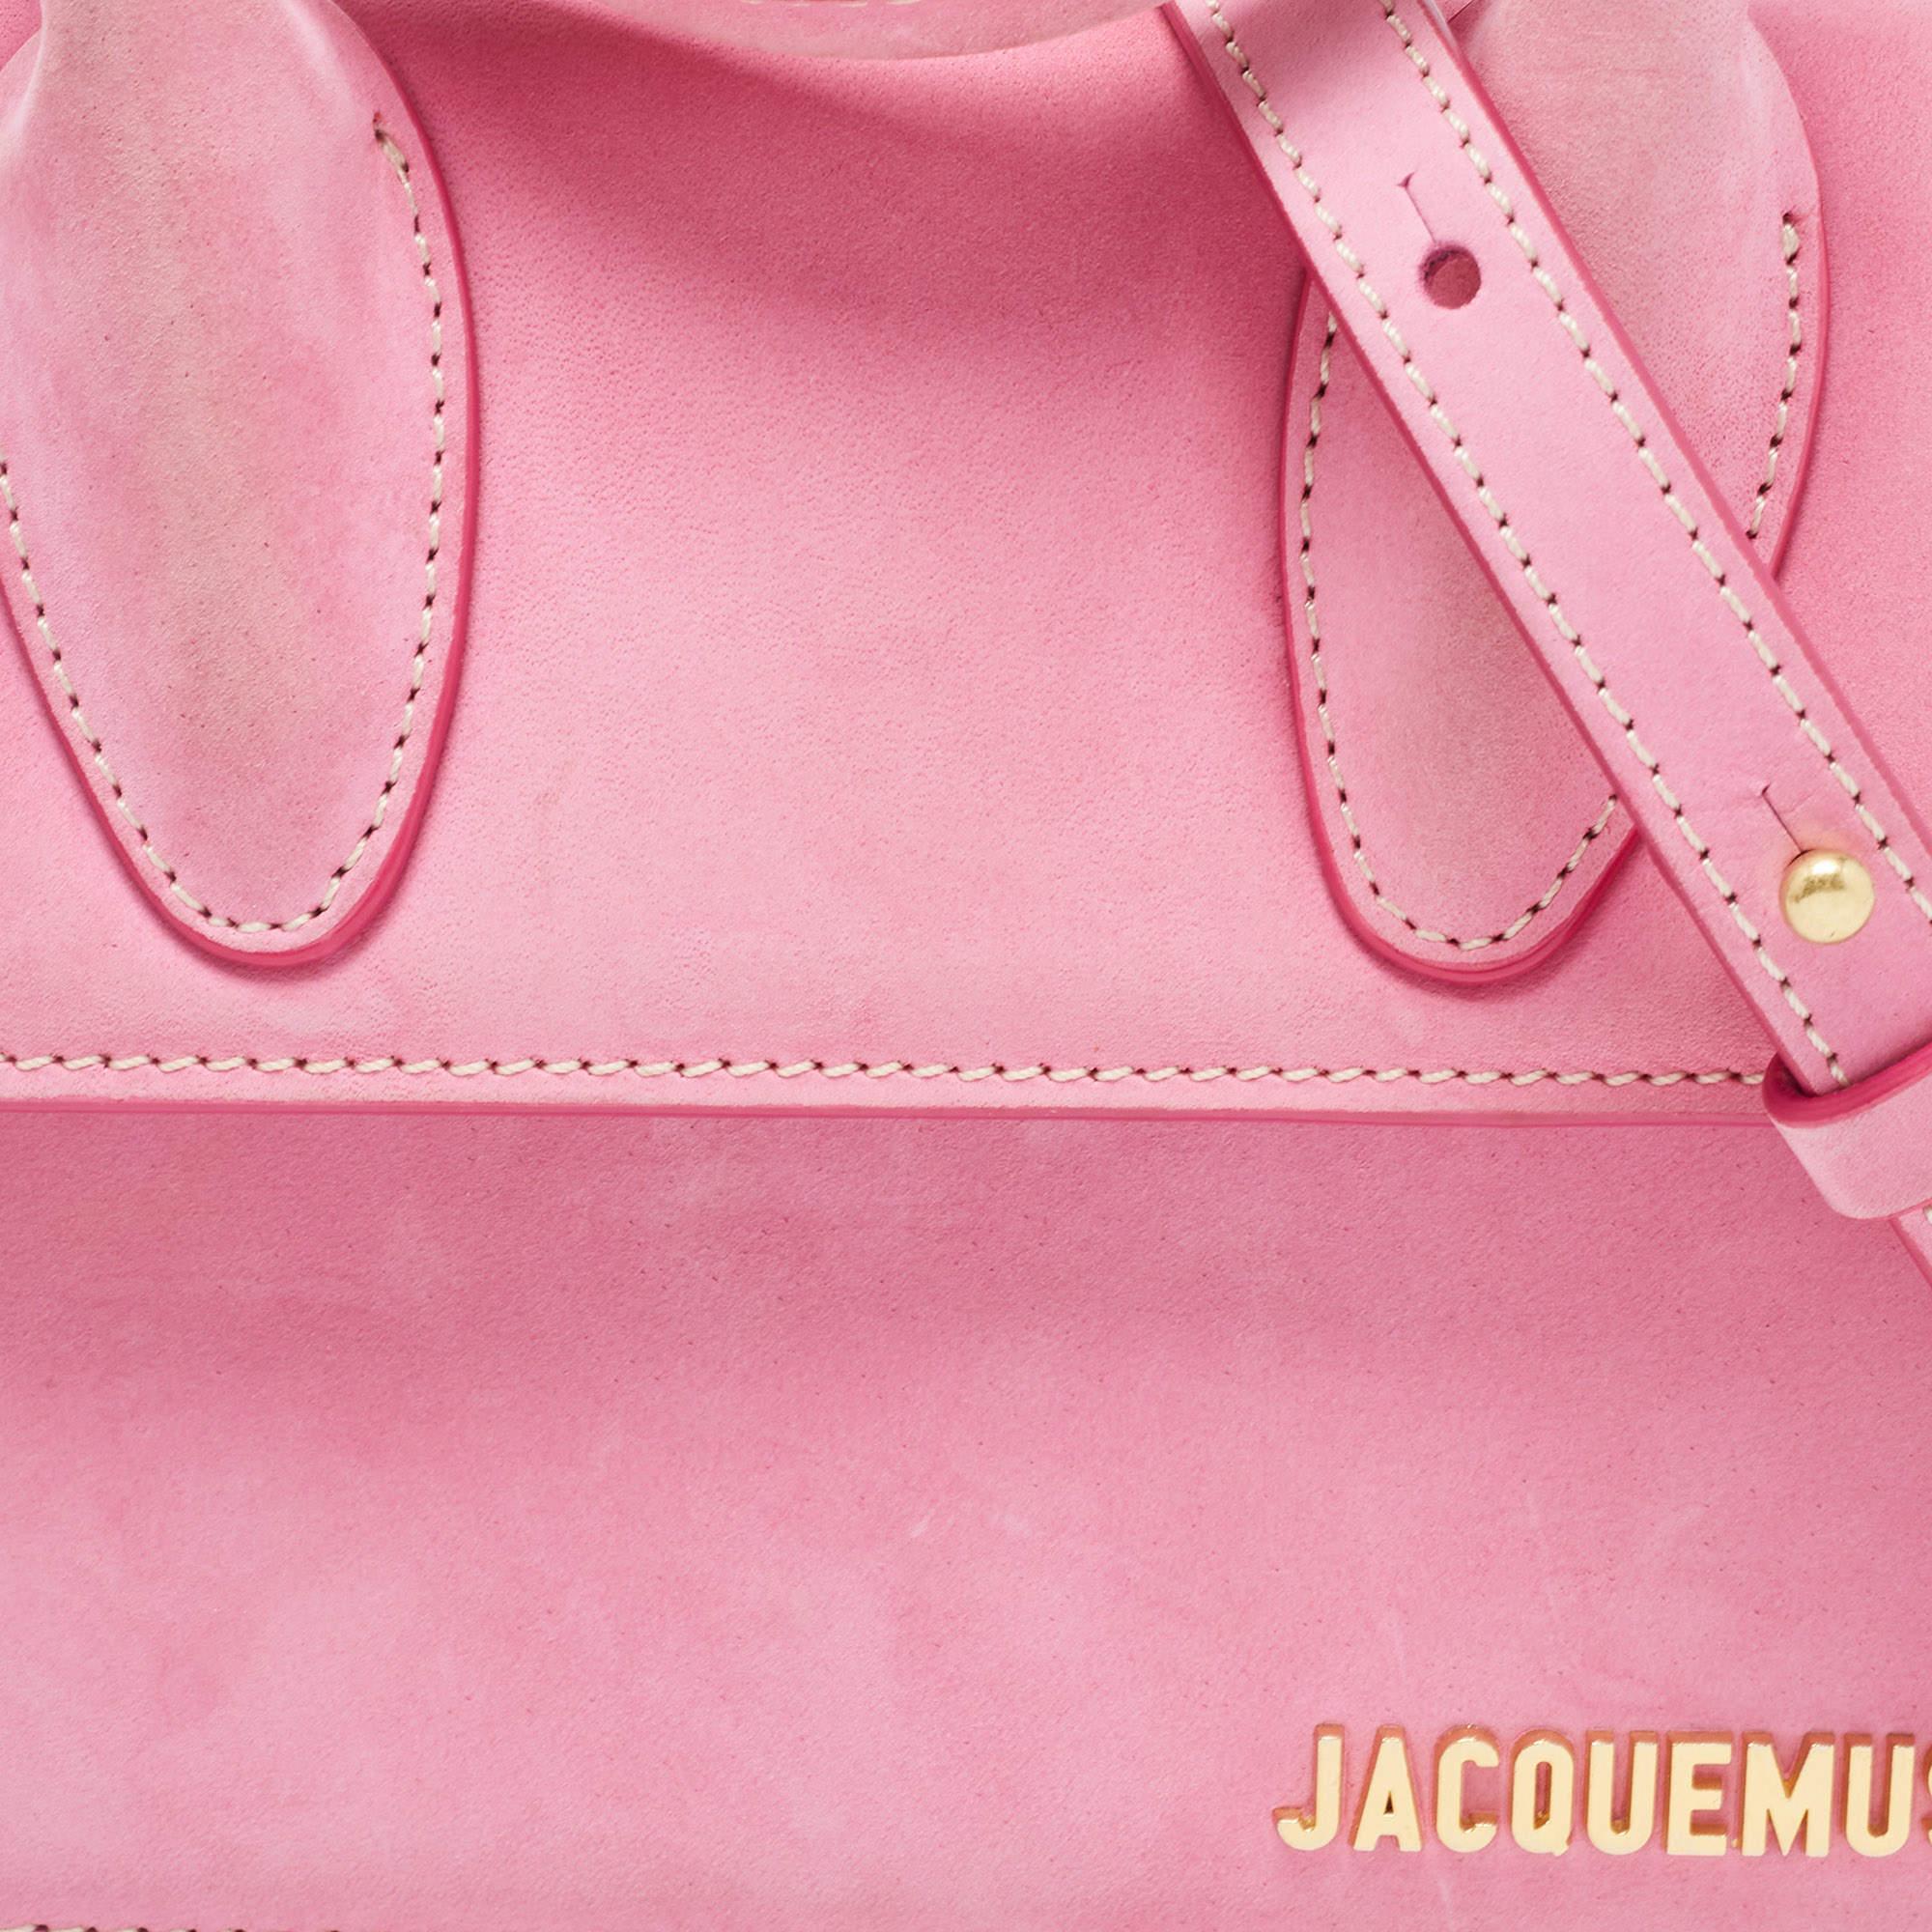 Jacquemus Pink Nubuck Leather Le Chiquito Noeud Top Handle Bag 8